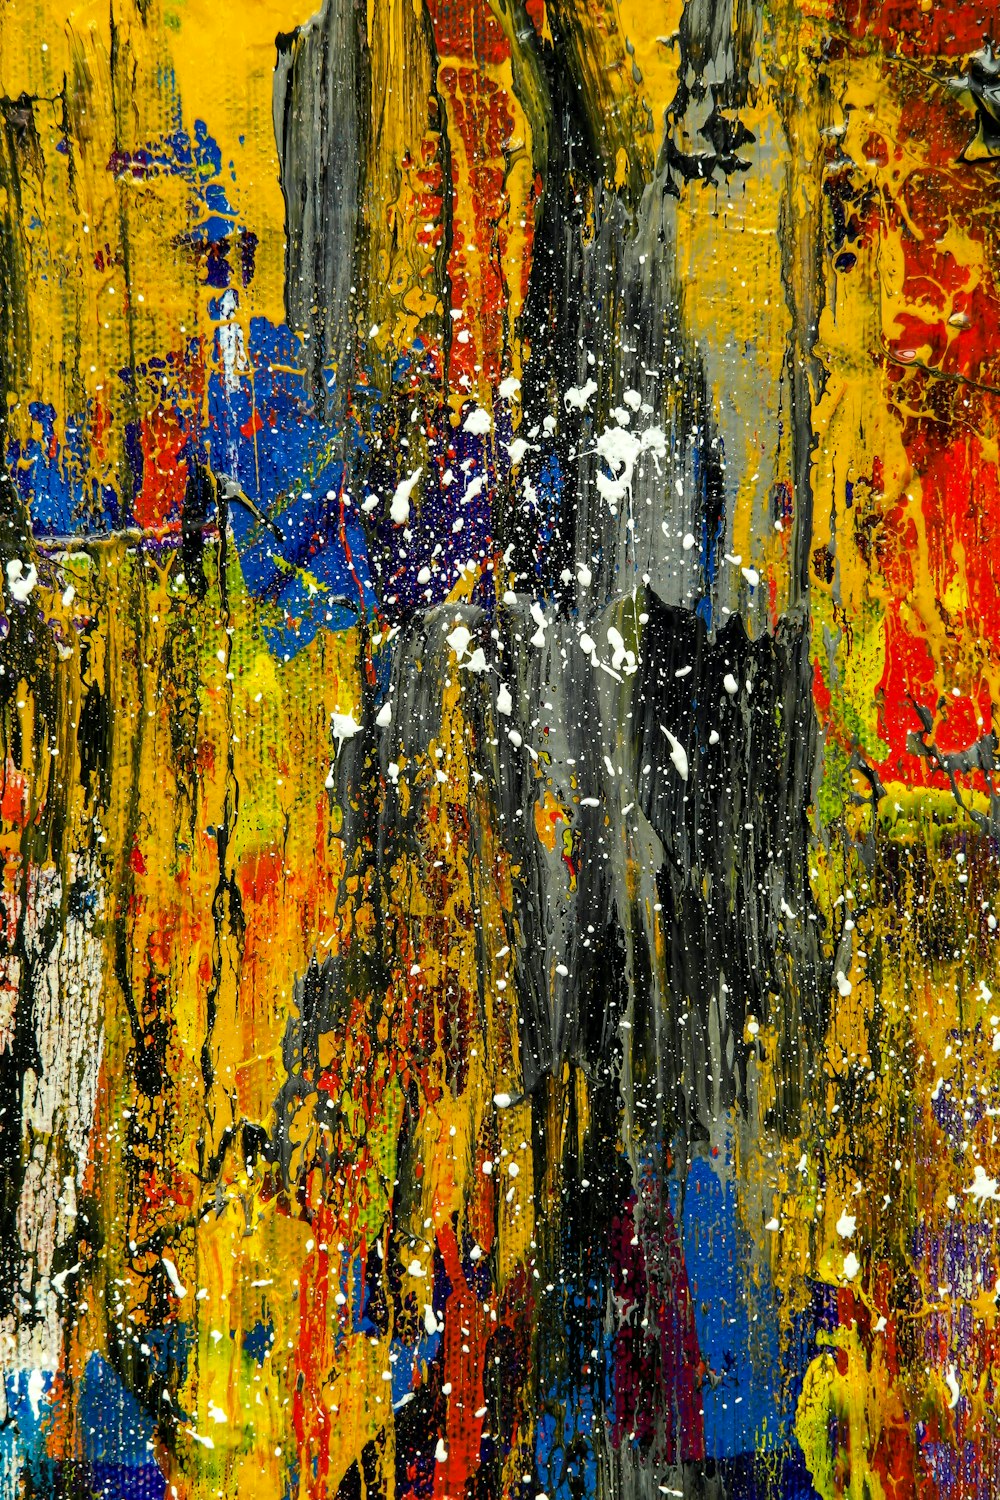 Black, red, yellow, and white abstract painting photo – Free Modern art  Image on Unsplash